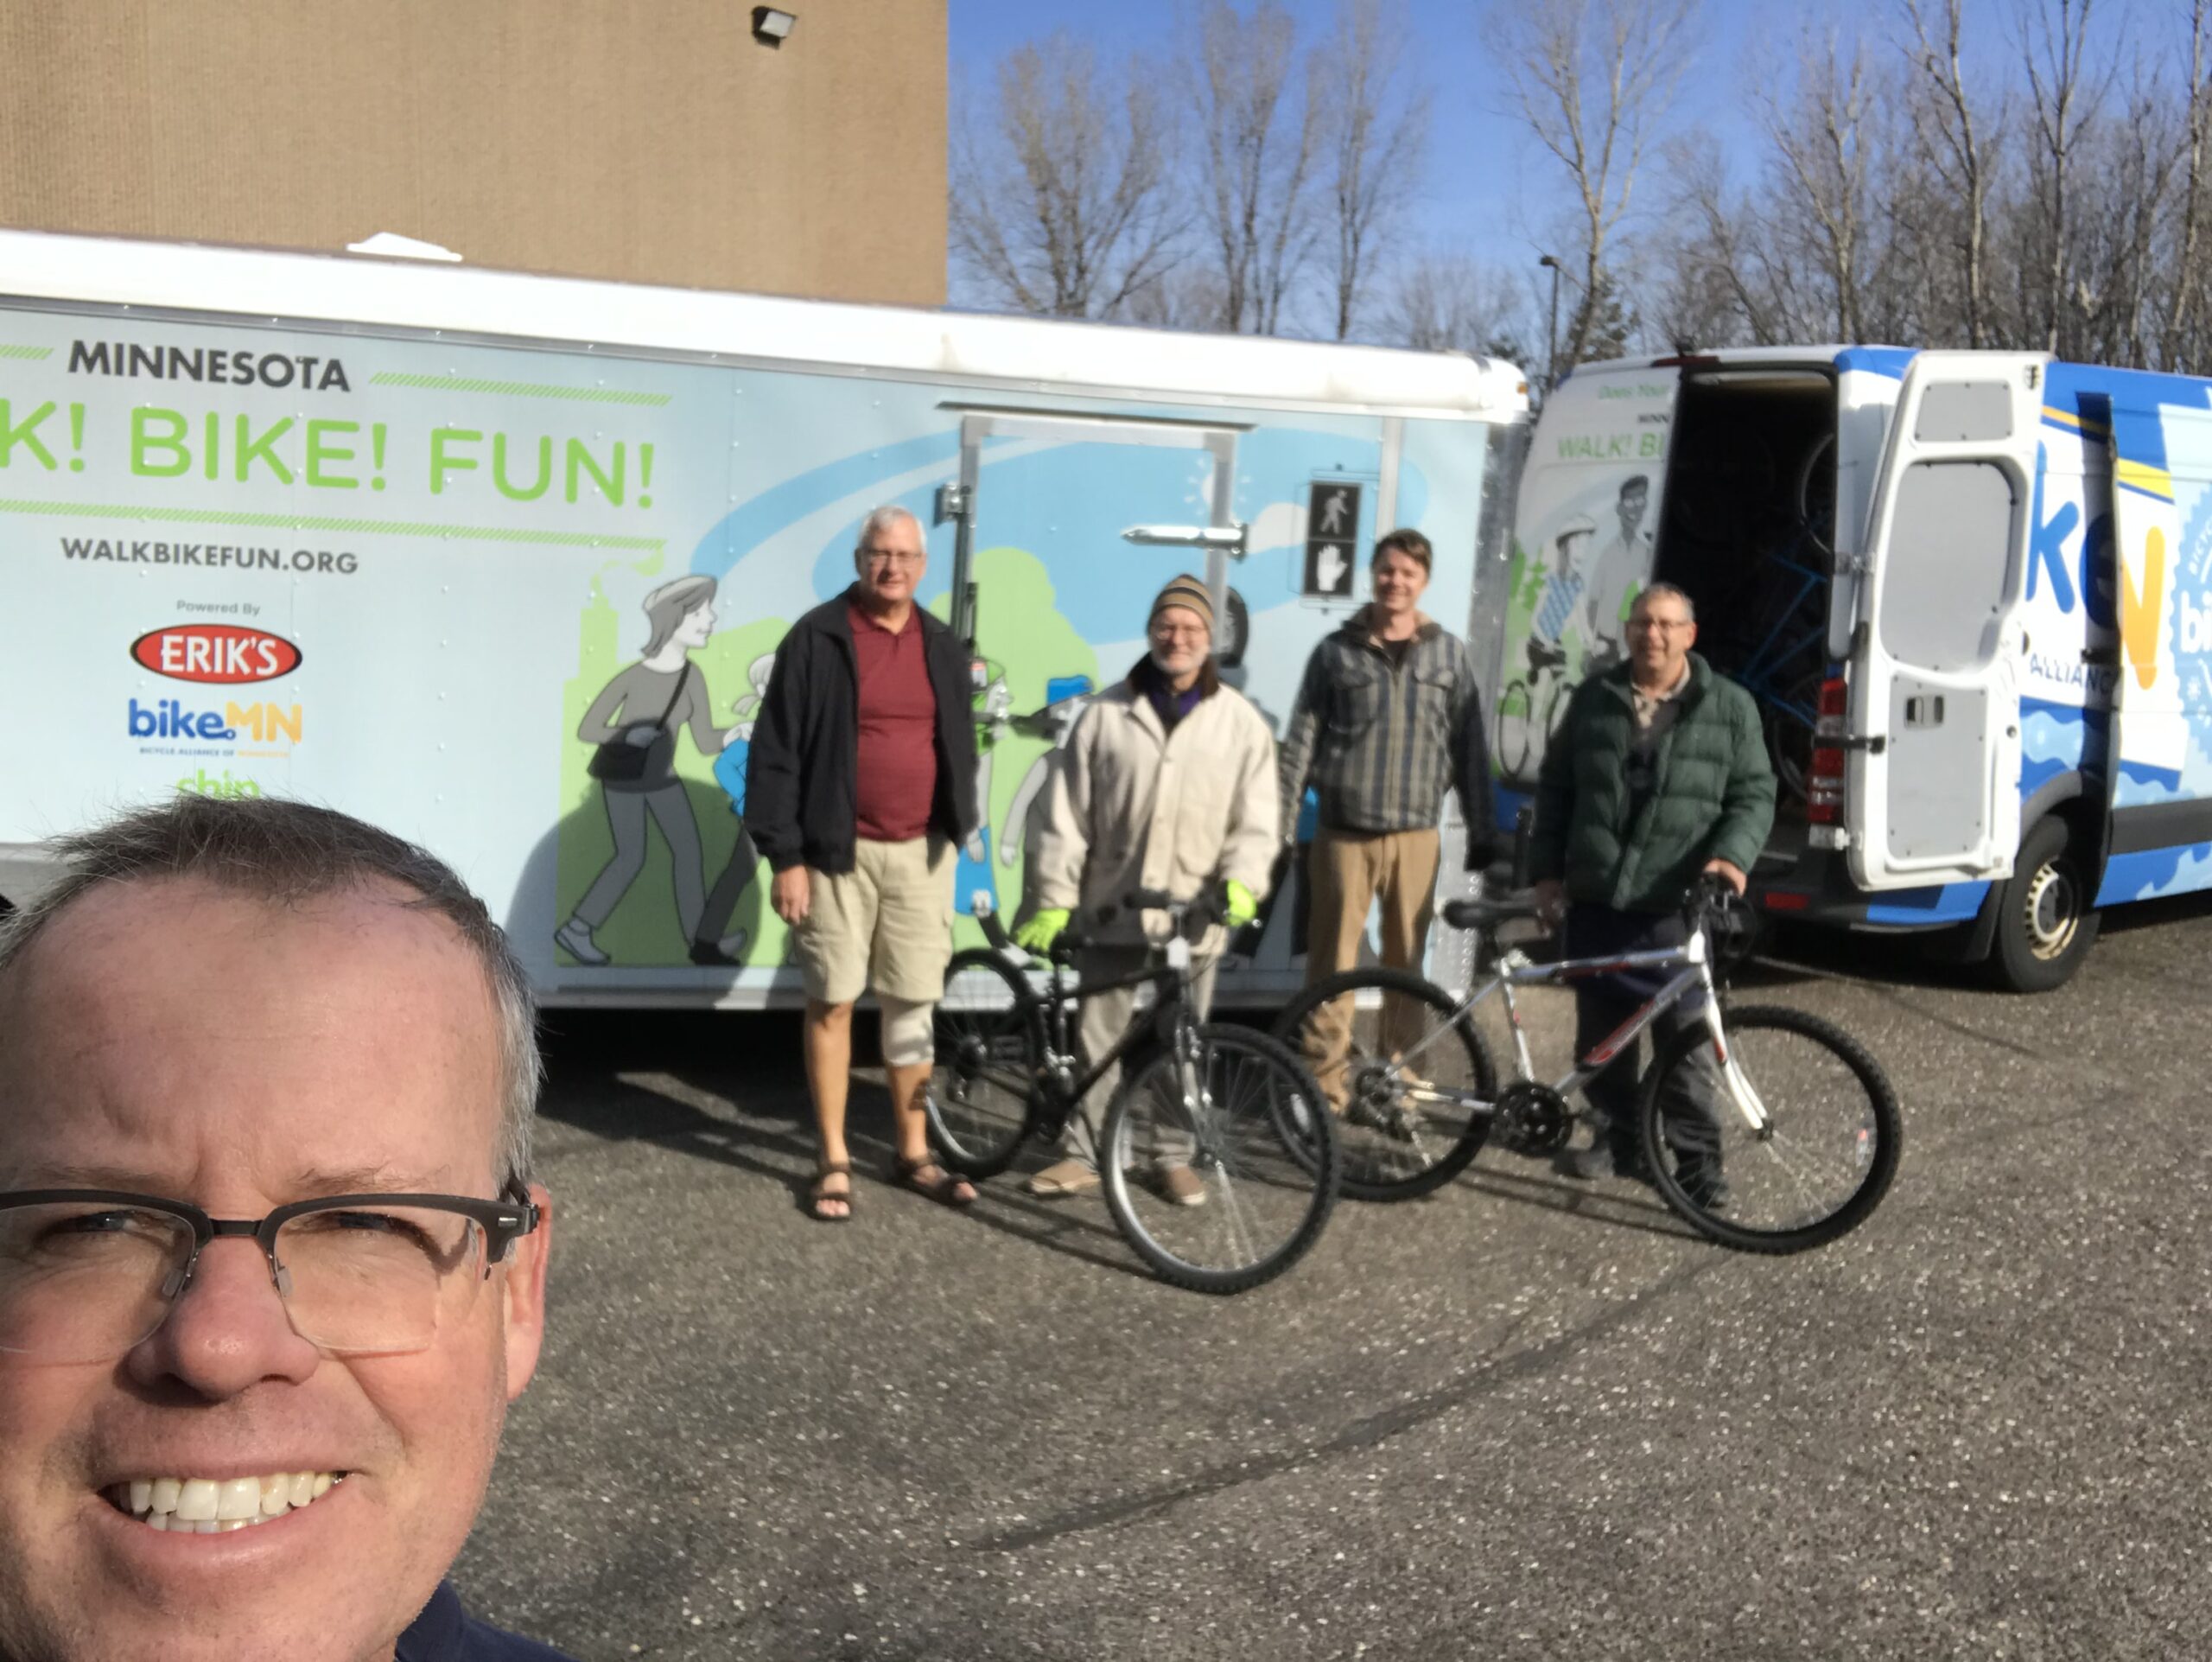 Pete, Tim, and Lynn from the Recyclery help CJ and Dorian load bikes that were donated and repaired by the Recyclery.